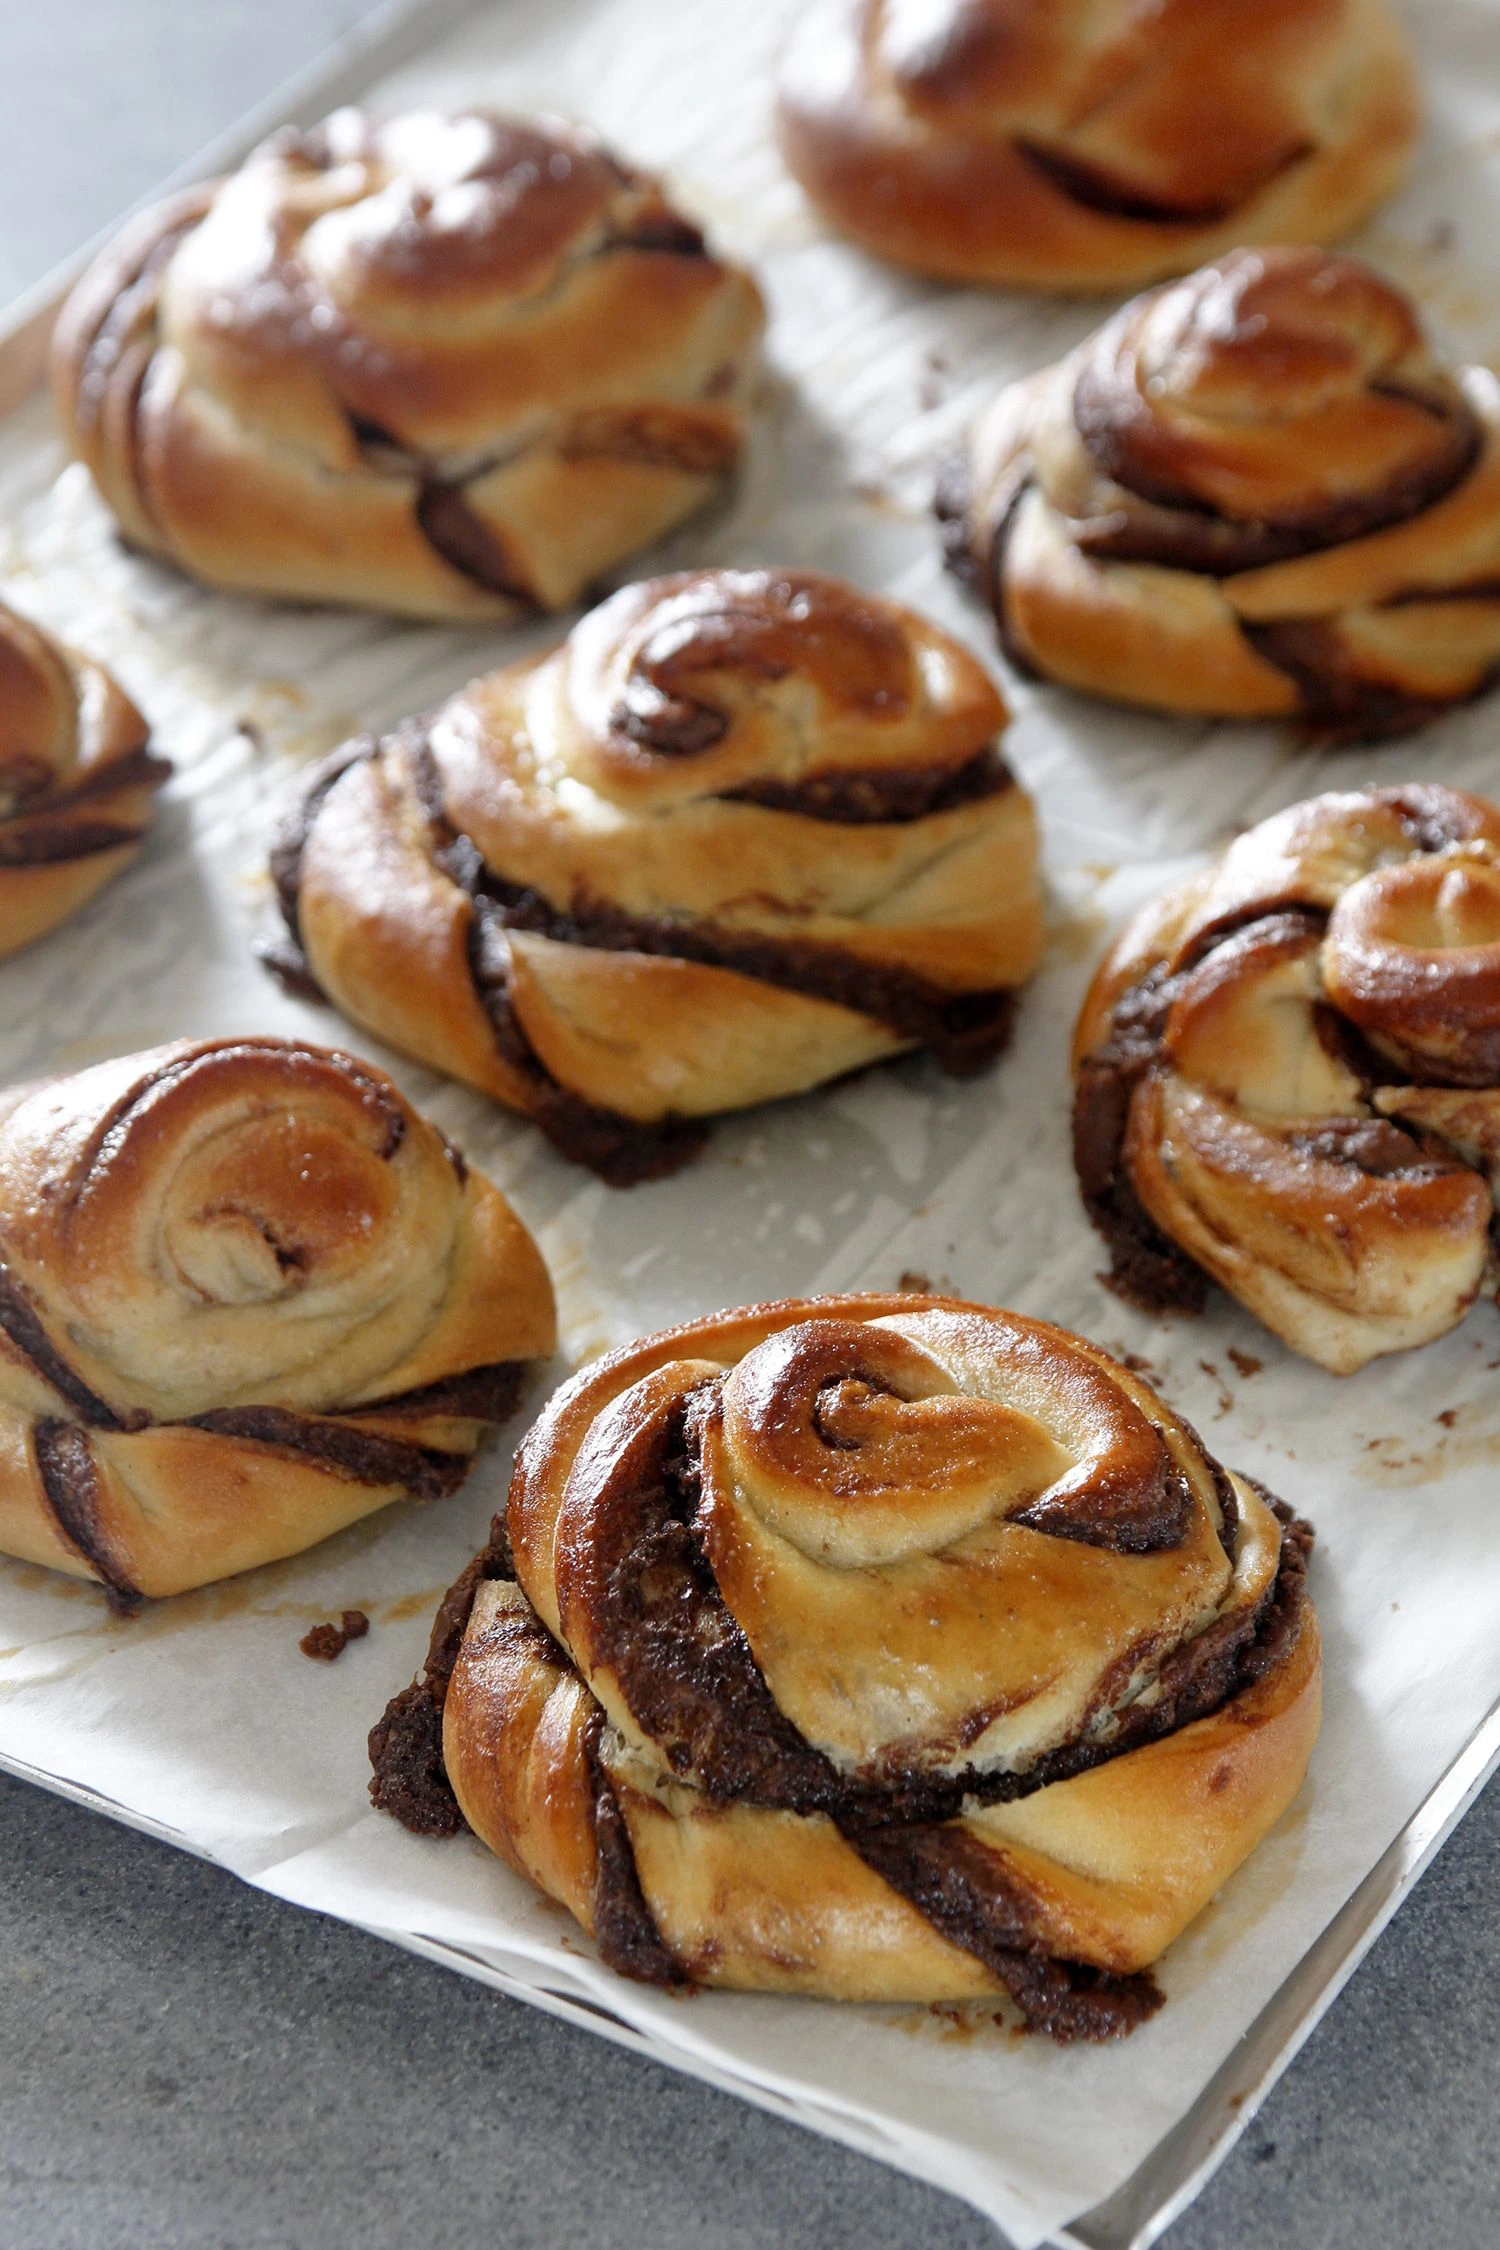 Baked chocolate rolls on a parchment paper